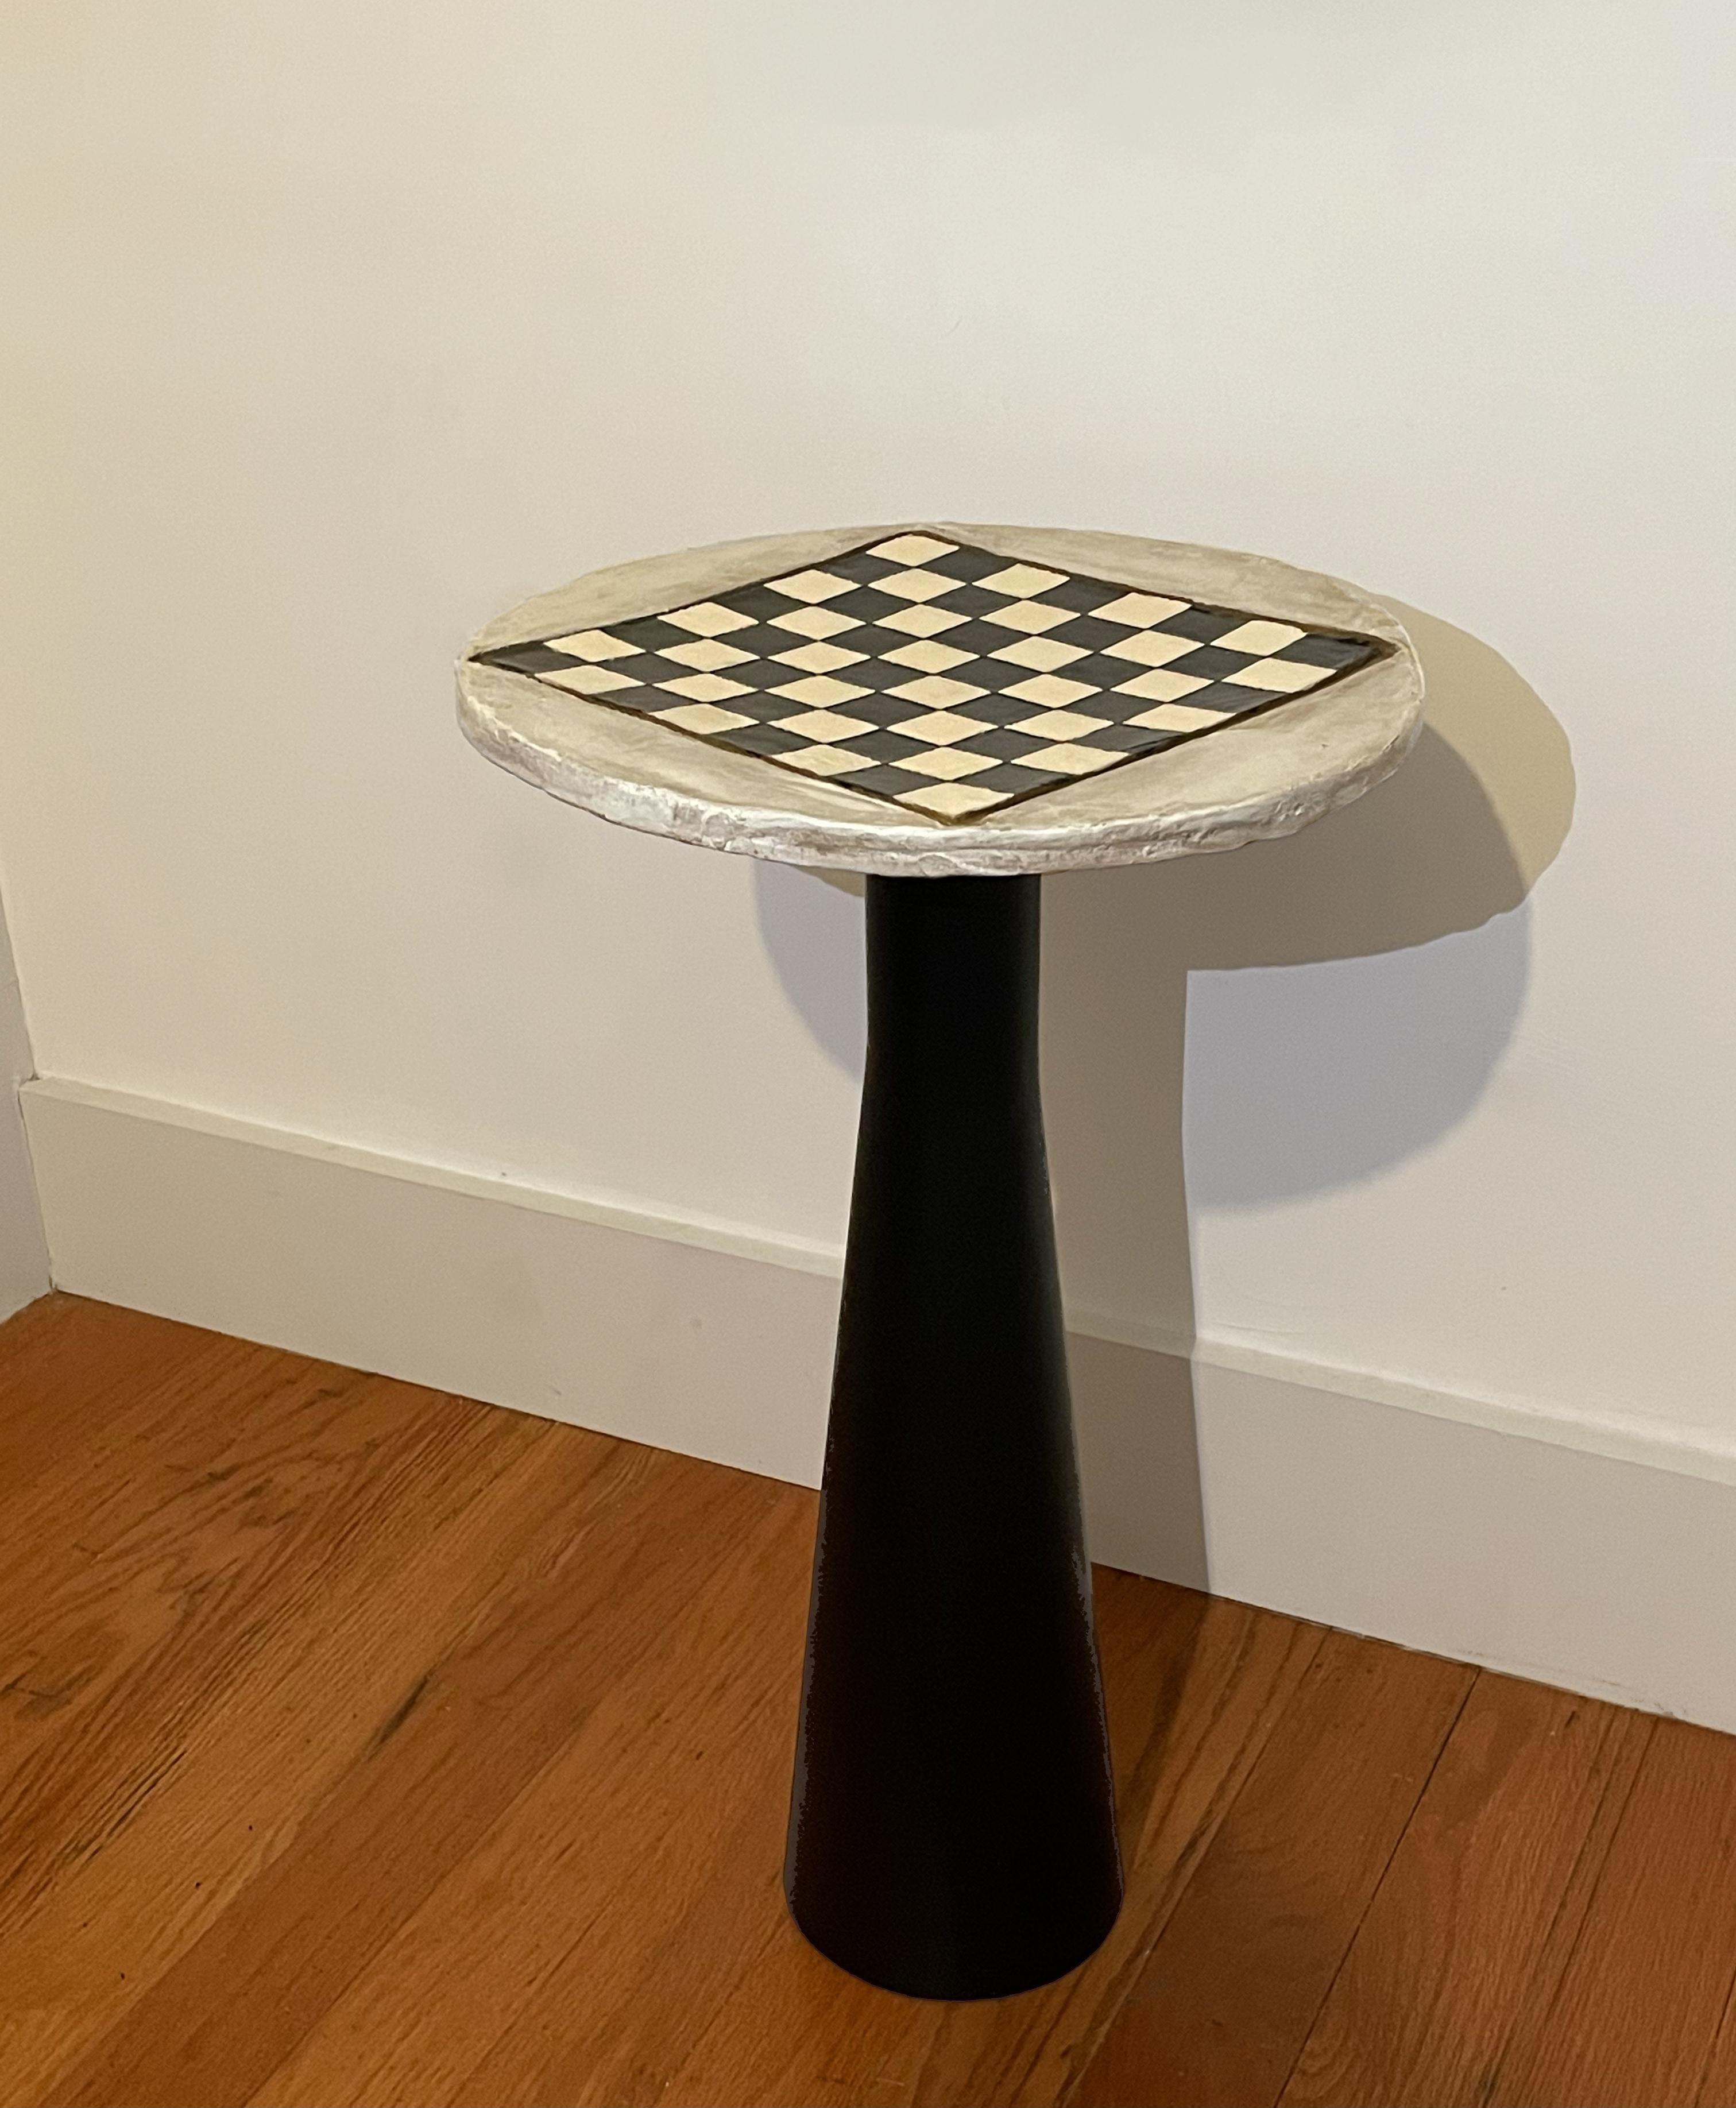 Whether you're a chess enthusiast or appreciate handmade craftsmanship, this table is a timeless addition to any space. Display it proudly and make every game a stylish affair, or use it for a decorative accent. 

The tabletop is a hand crafted